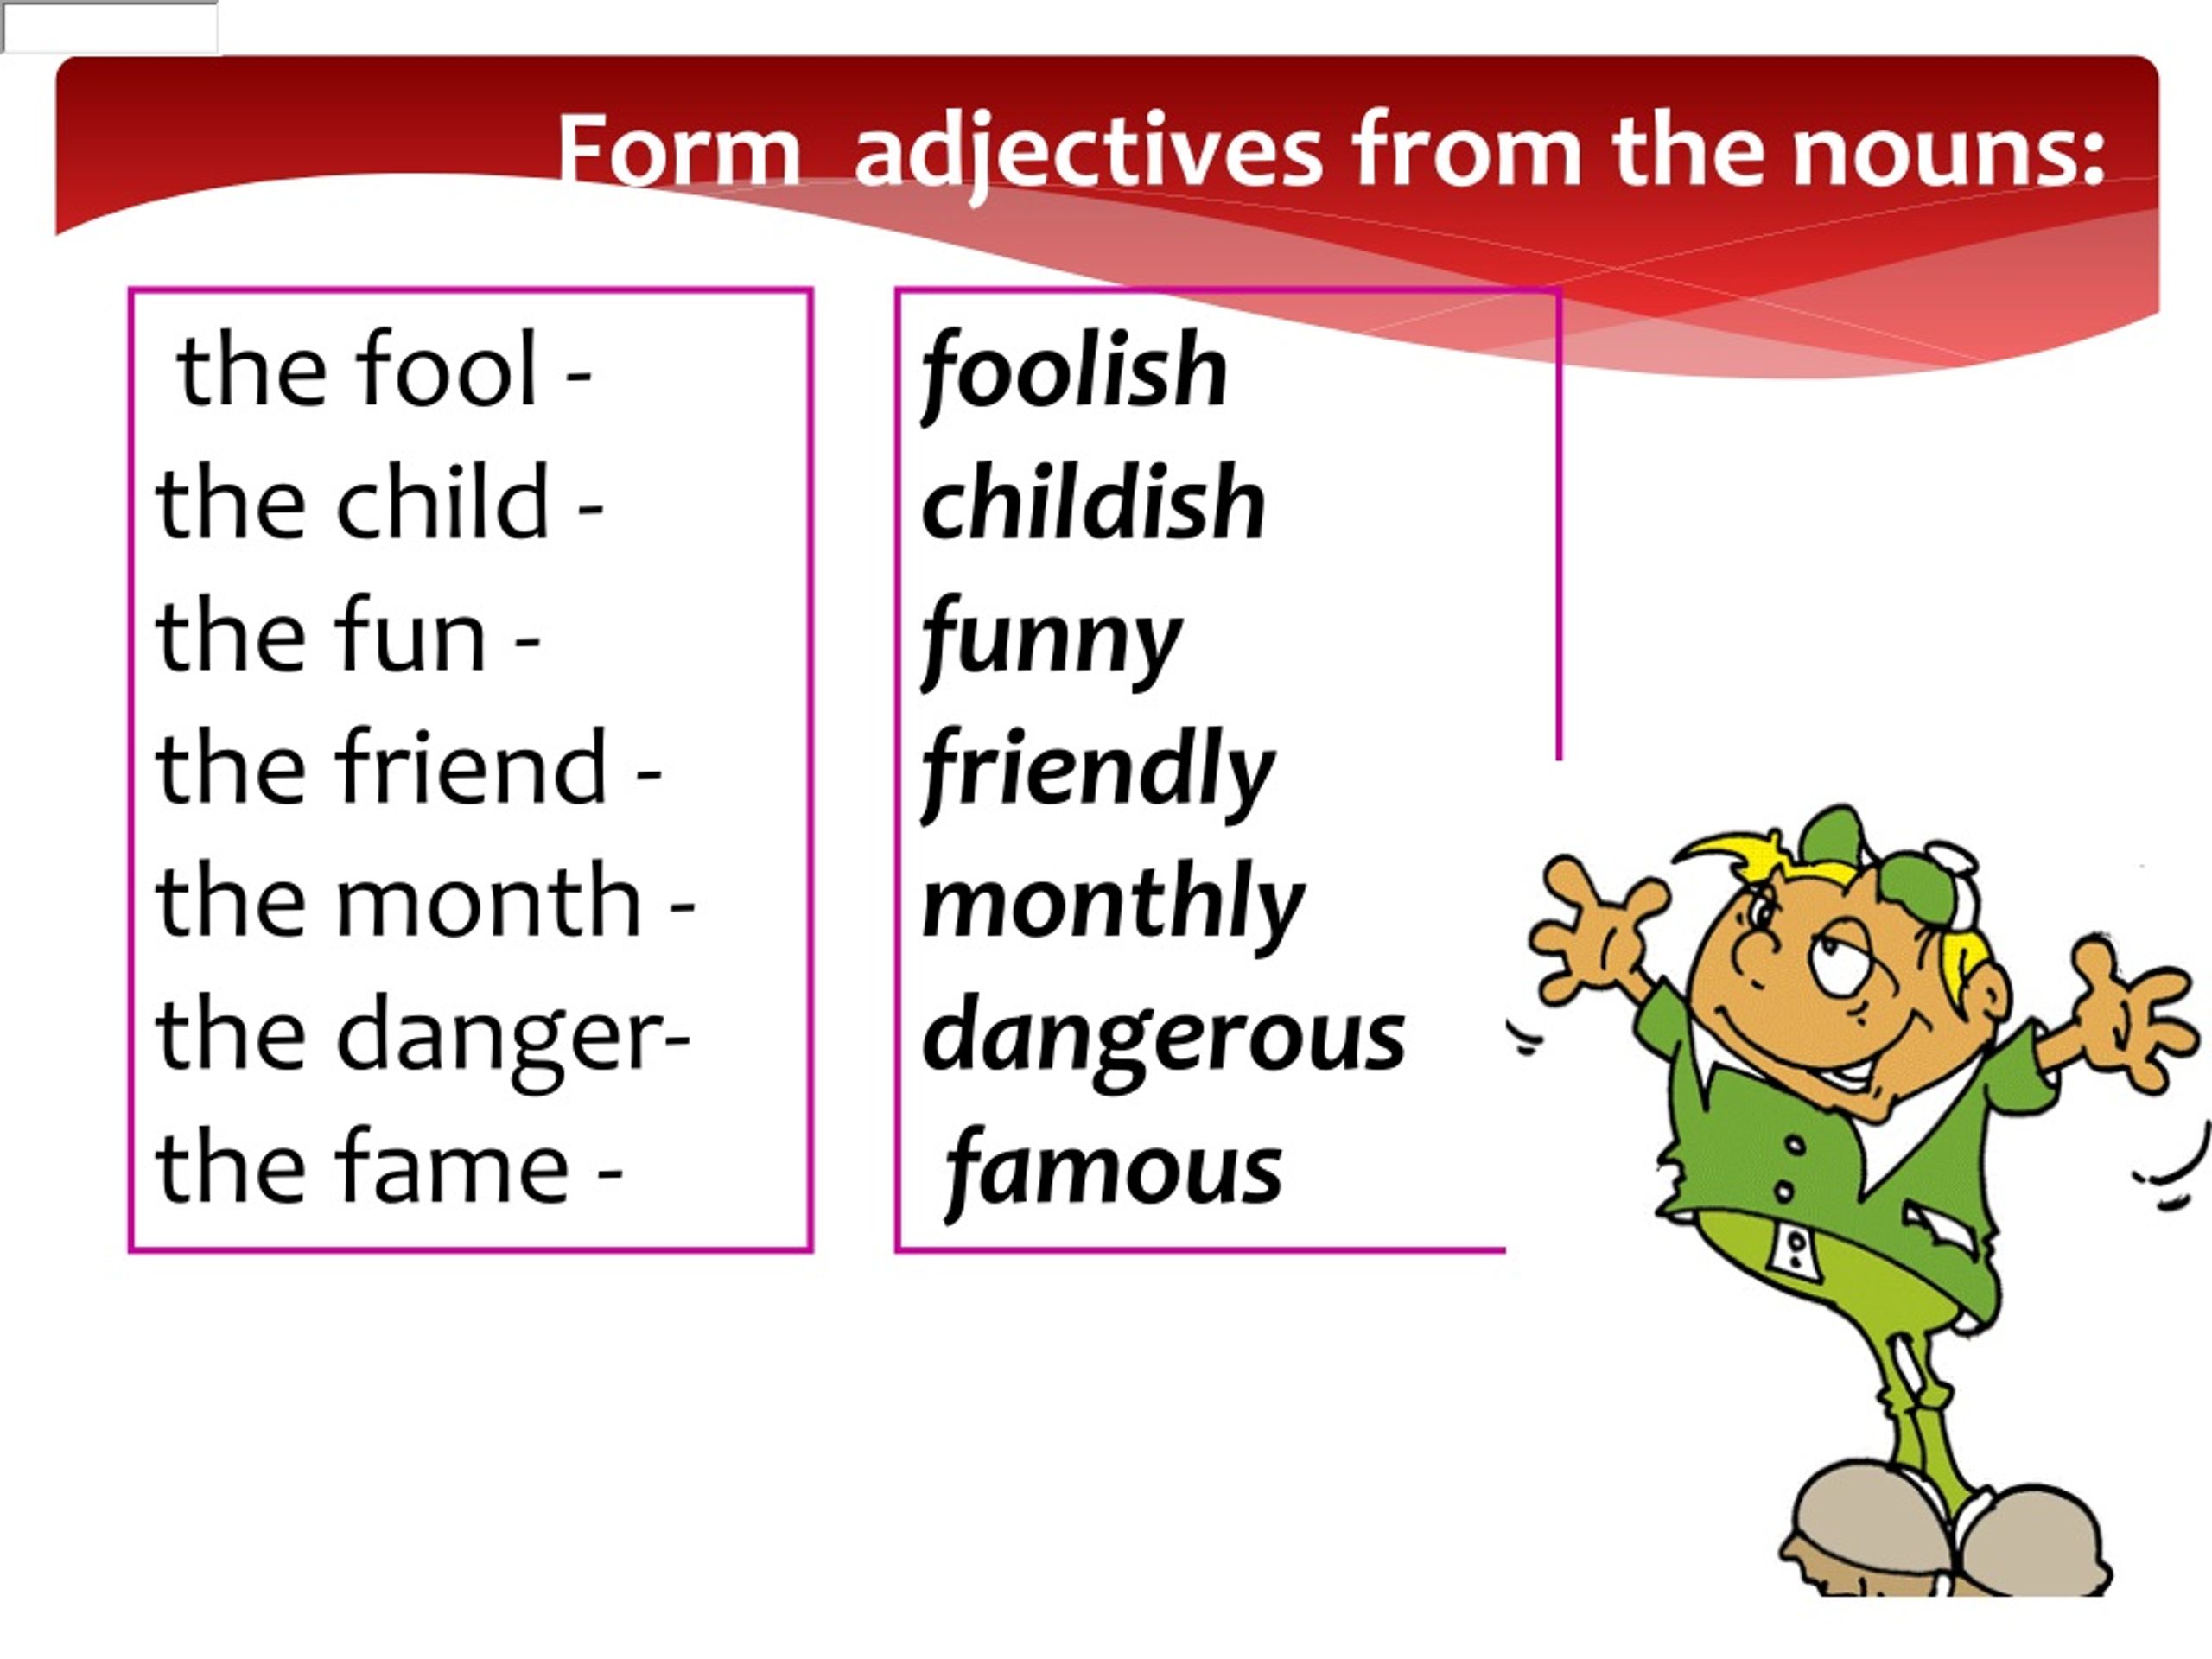 Adjective formation. Word formation Nouns. Word formation adjectives. Noun и adjective правило. Word building Nouns.